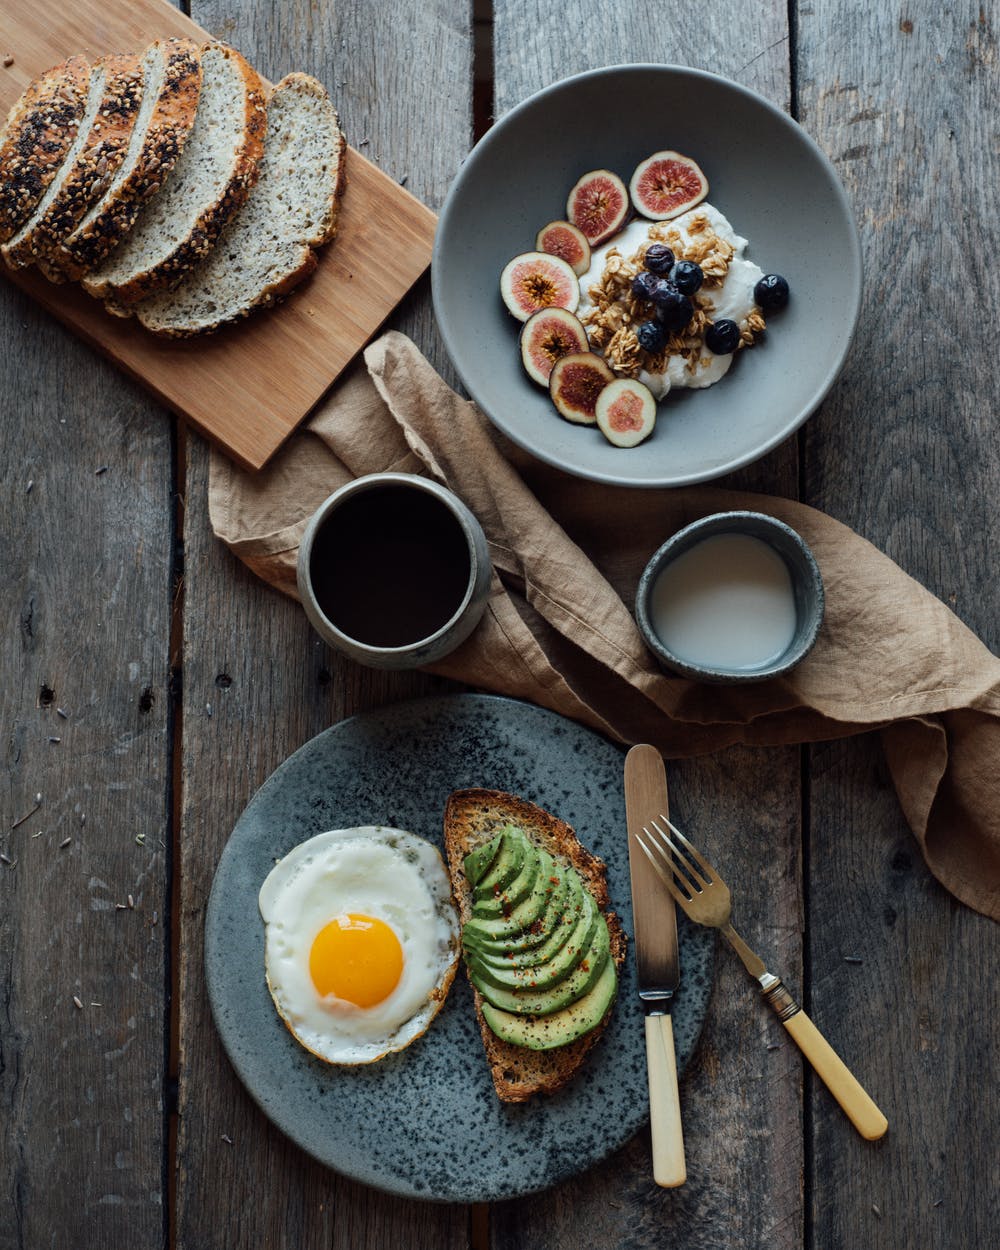 The 7 healthiest foods to eat for breakfest